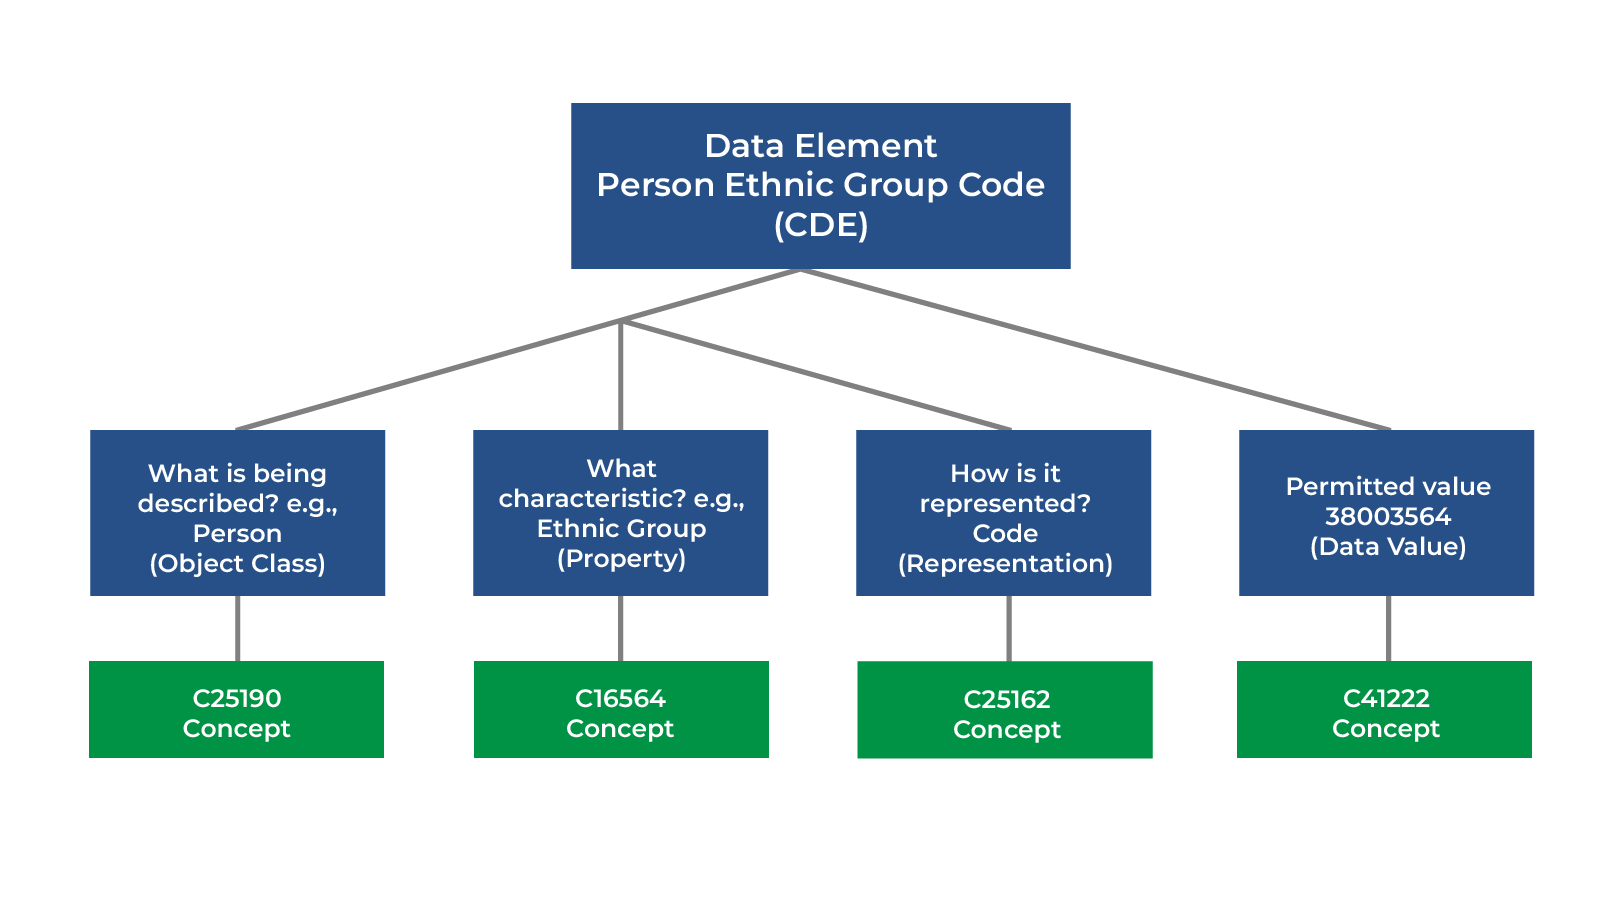 Flow chart shows a box with “Data Element: Person Ethnic Group Code (CDE)” at the top, with connections flowing to other boxes featuring descriptors used by other systems. The first connecting box reads: “What is being described? e.g., Person (Object Class)” which leads to a box with the concept number, “C25290 Concept.” The second connecting box reads: “What characteristic? e.g., Ethnic Group (Property),” which leads to the box “C16564 Concept.” The third box reads: “How is it represented? Code (Representa